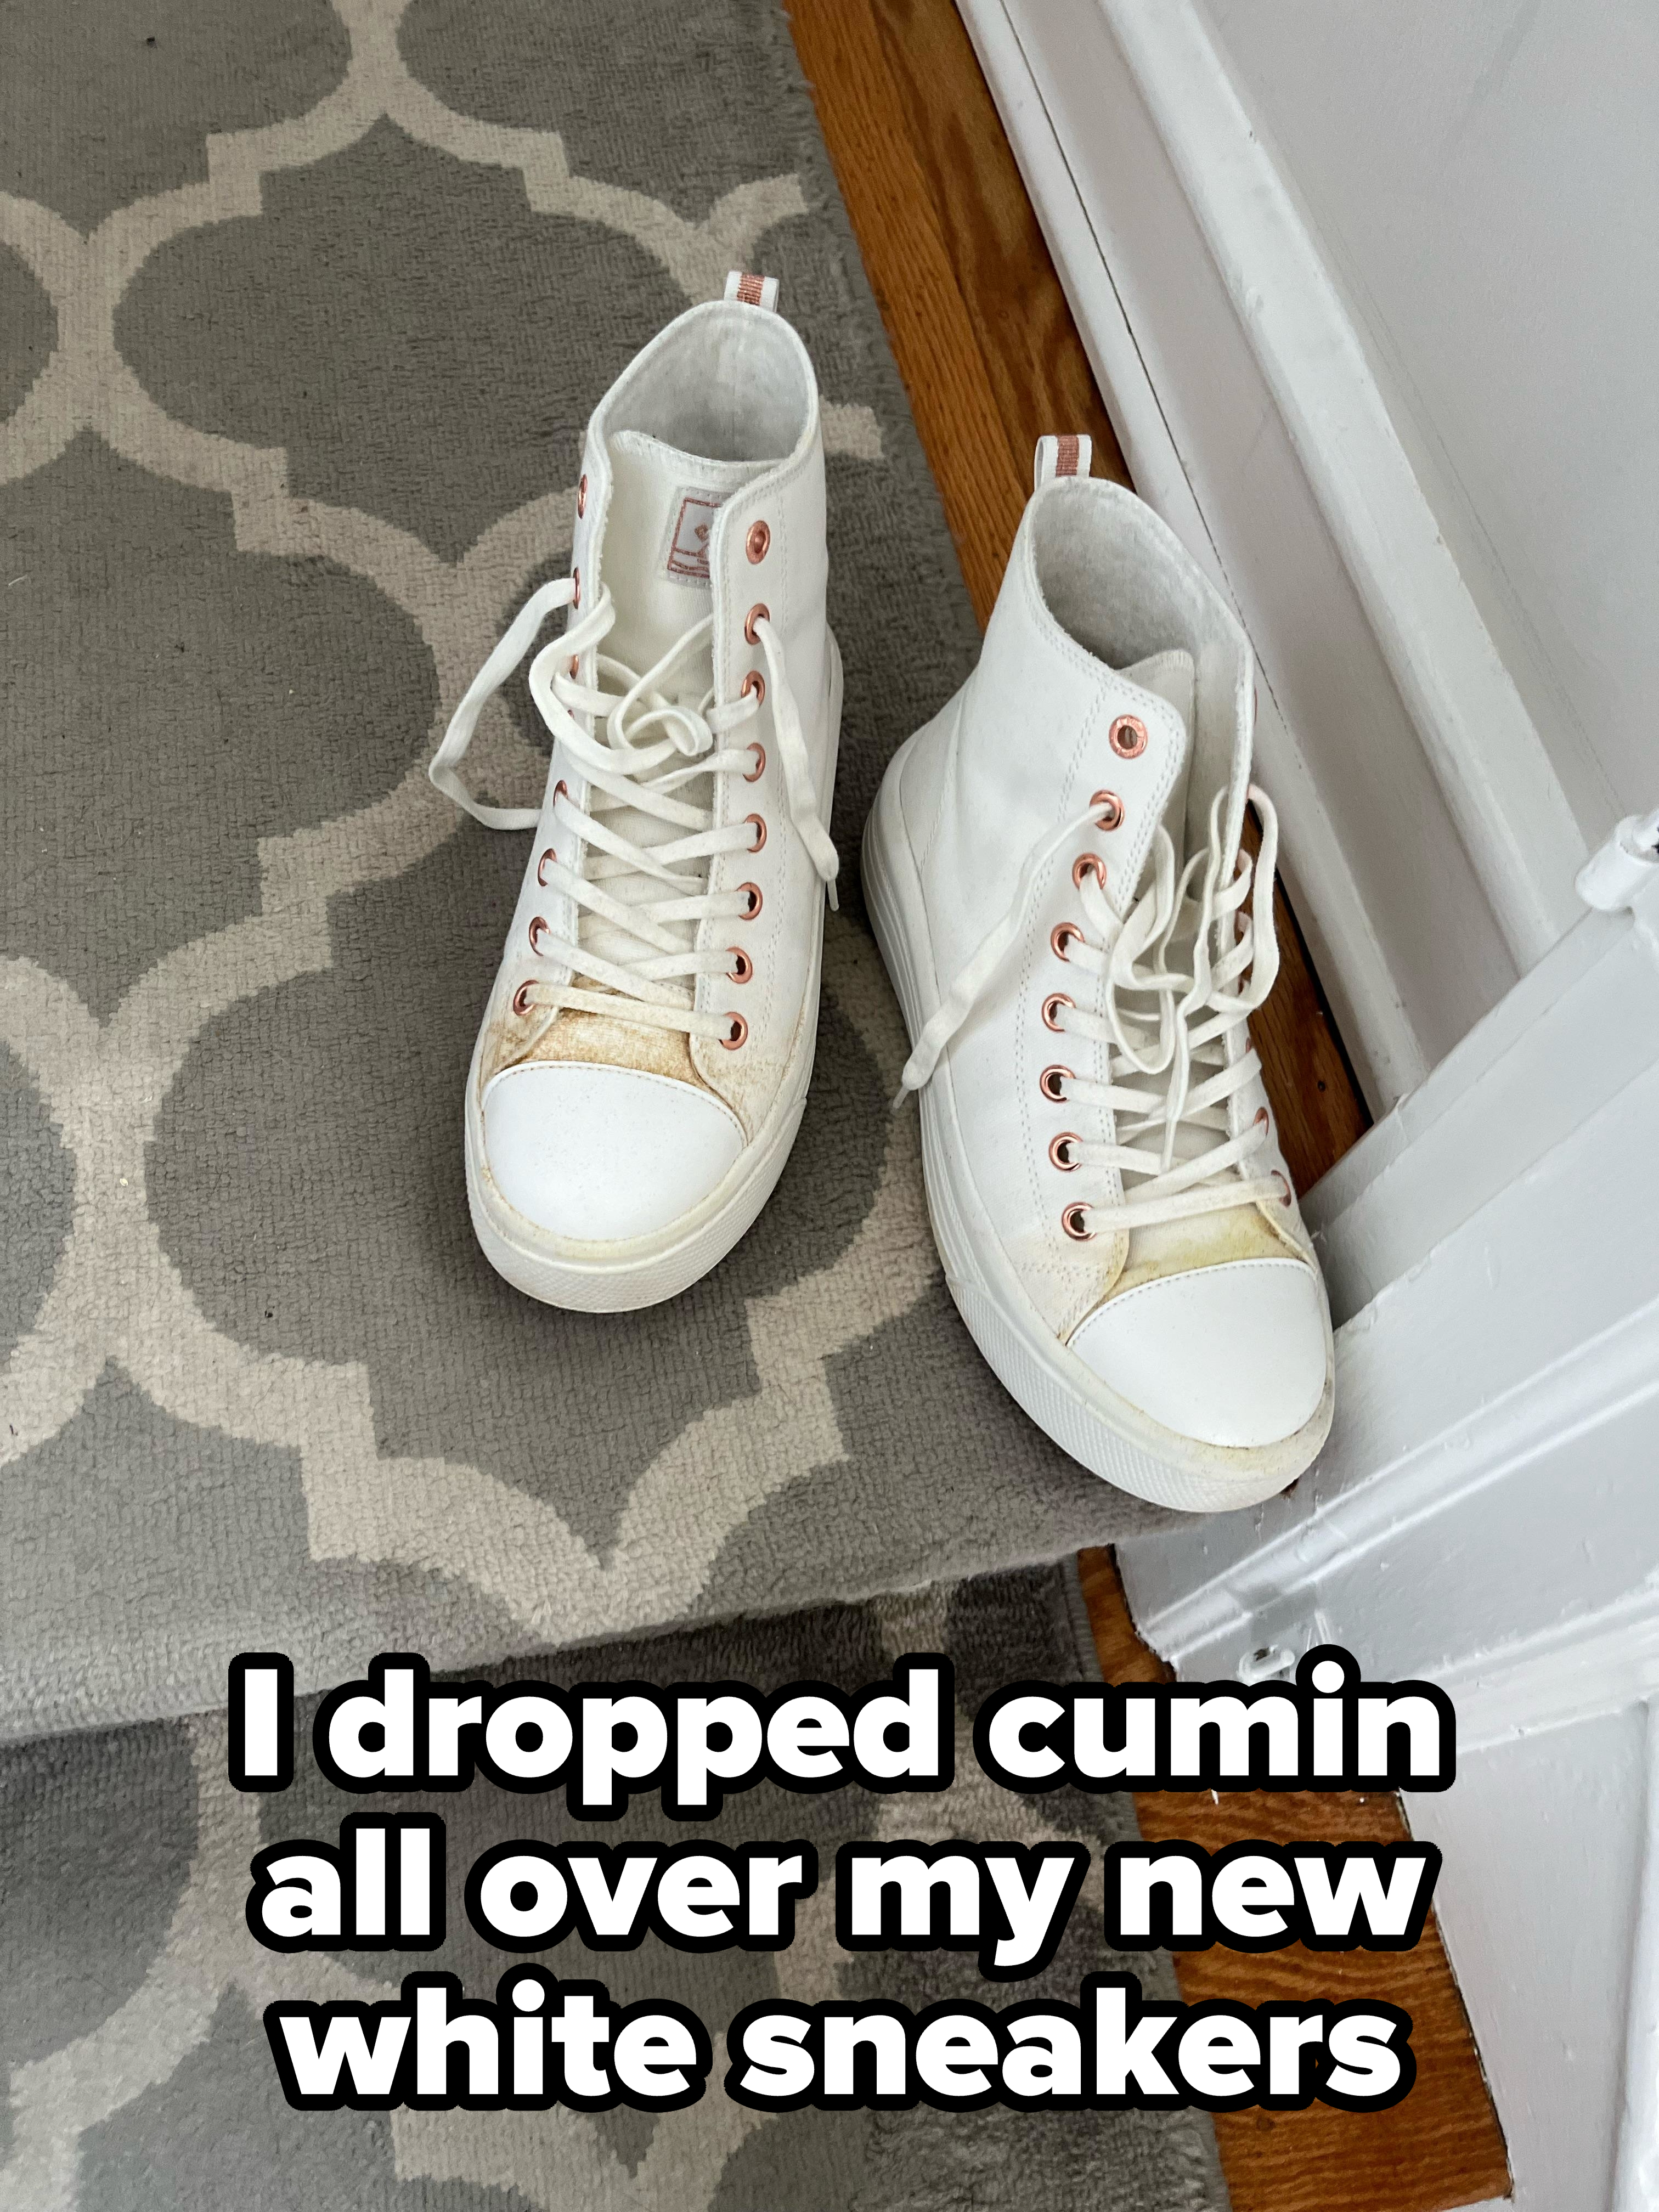 A pair of white high-top sneakers with lots of reddish stains are on a patterned floor next to a door